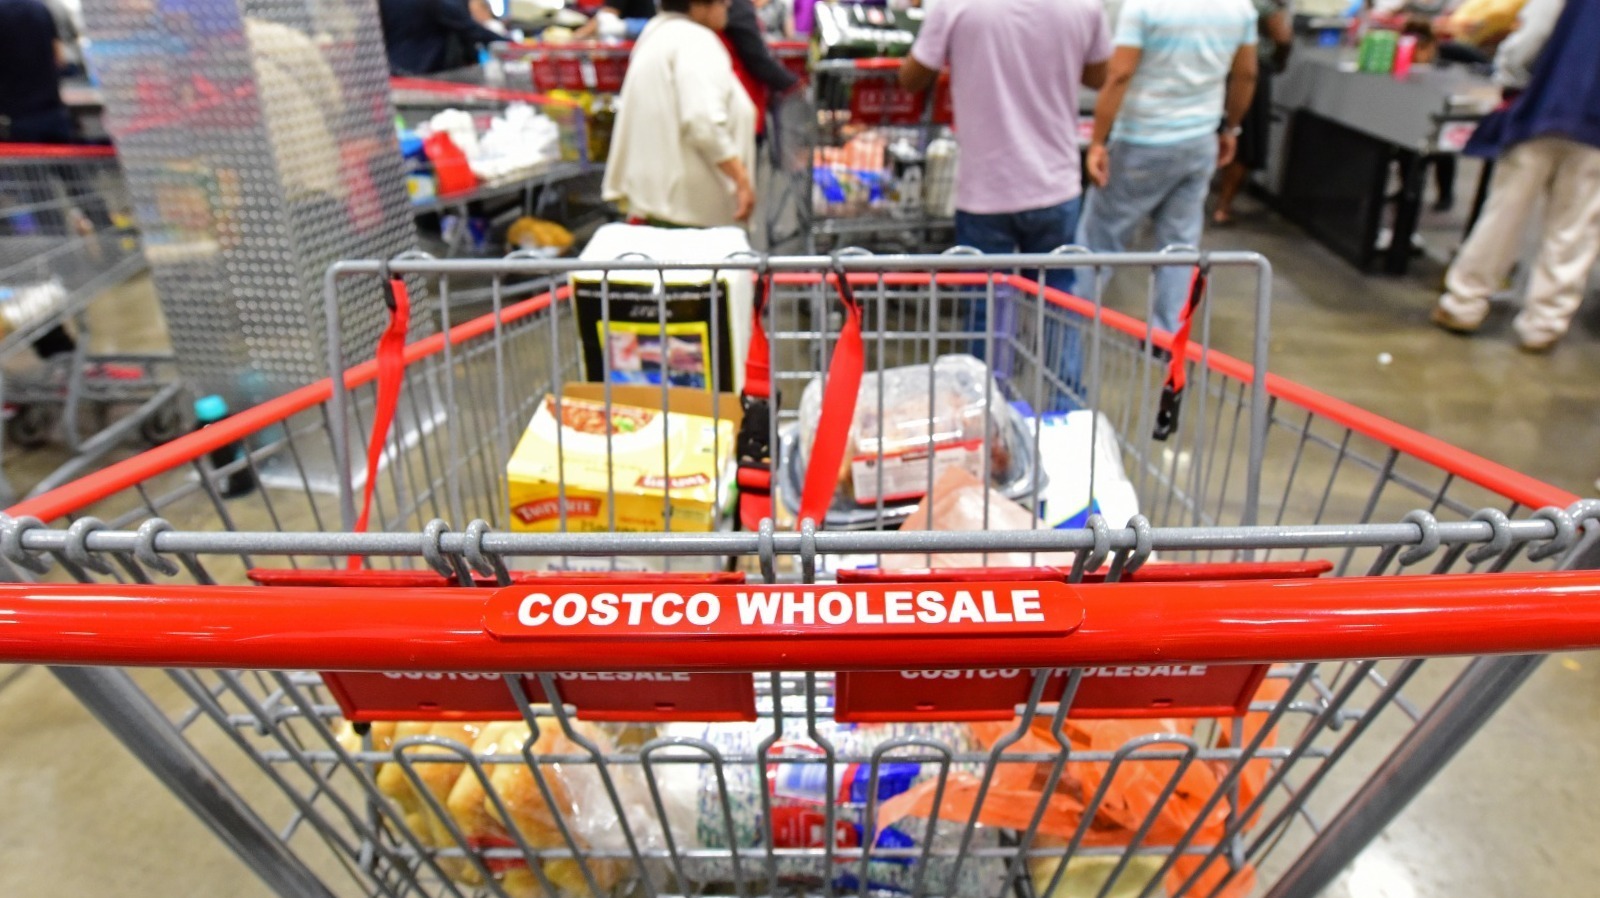 The Reusable Bags That Have Costco Shoppers Freaking Out